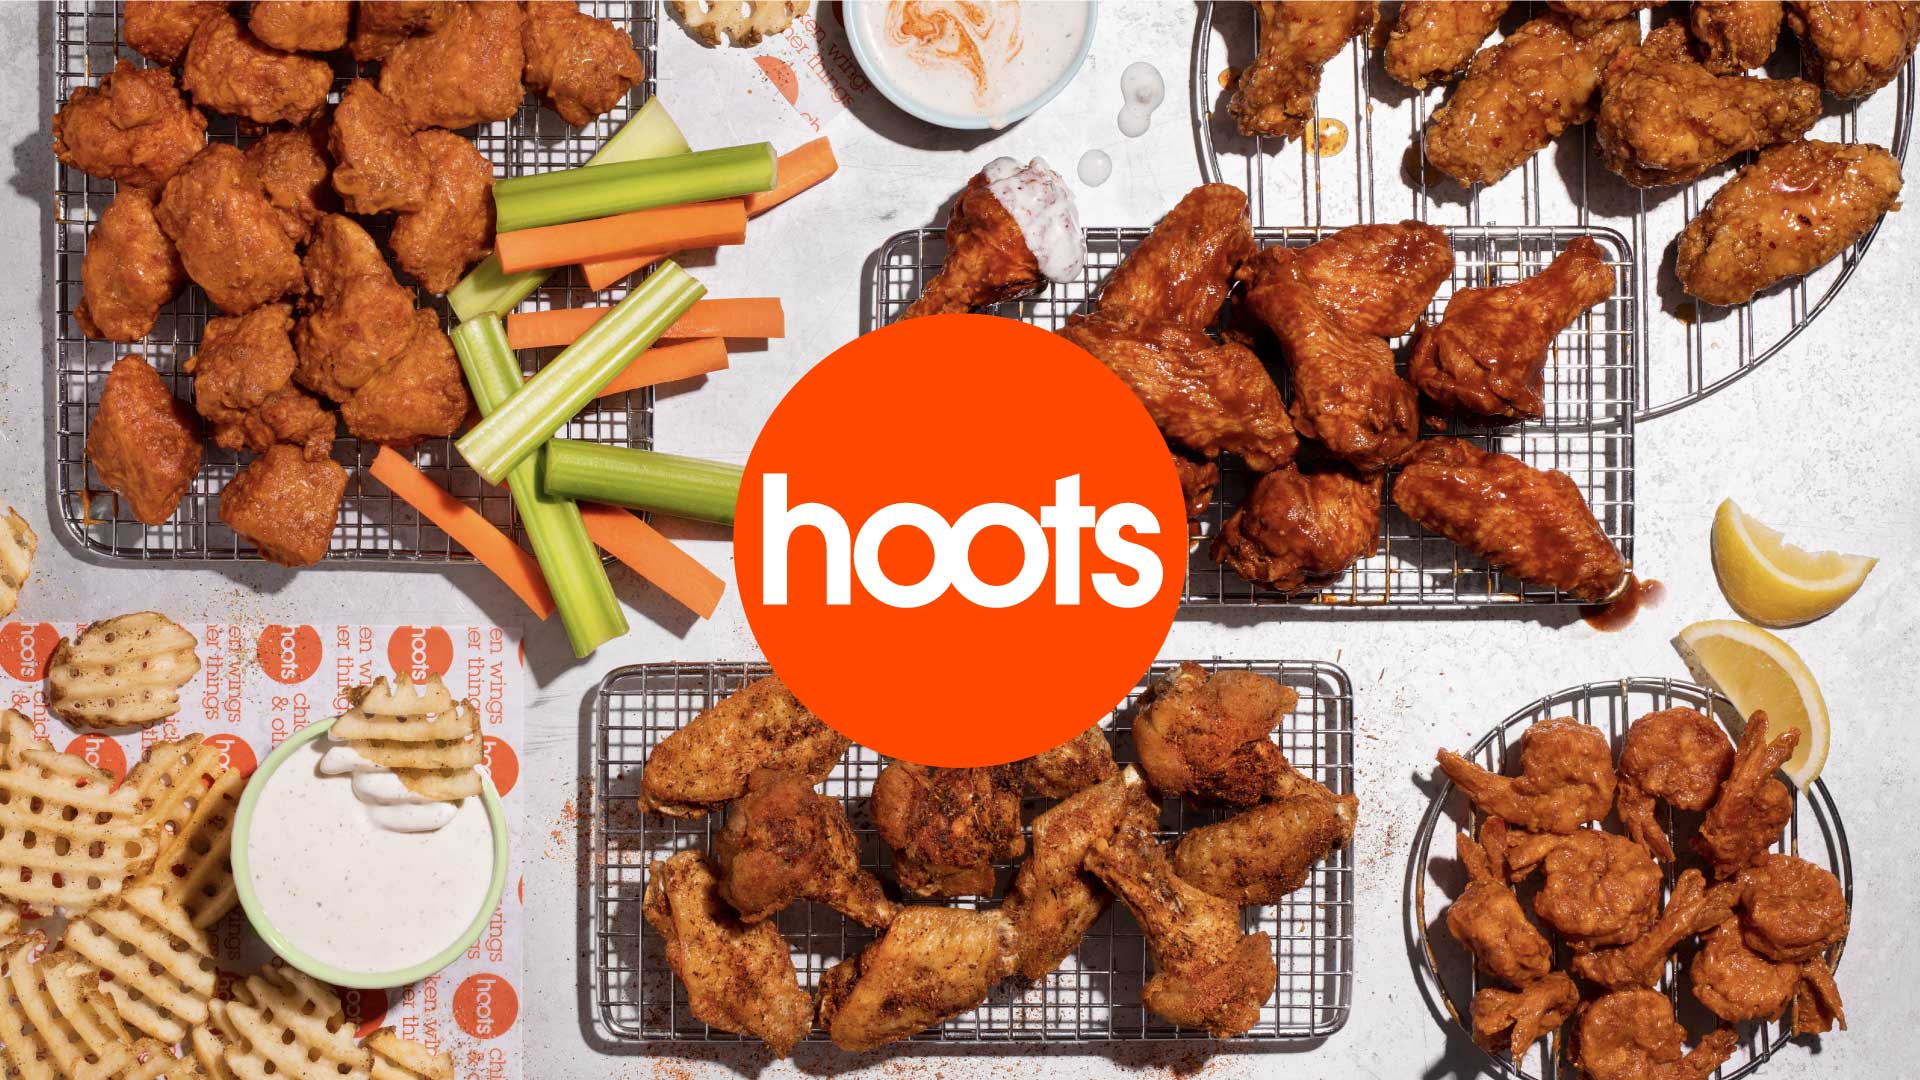 Hoots - A Hooters Joint